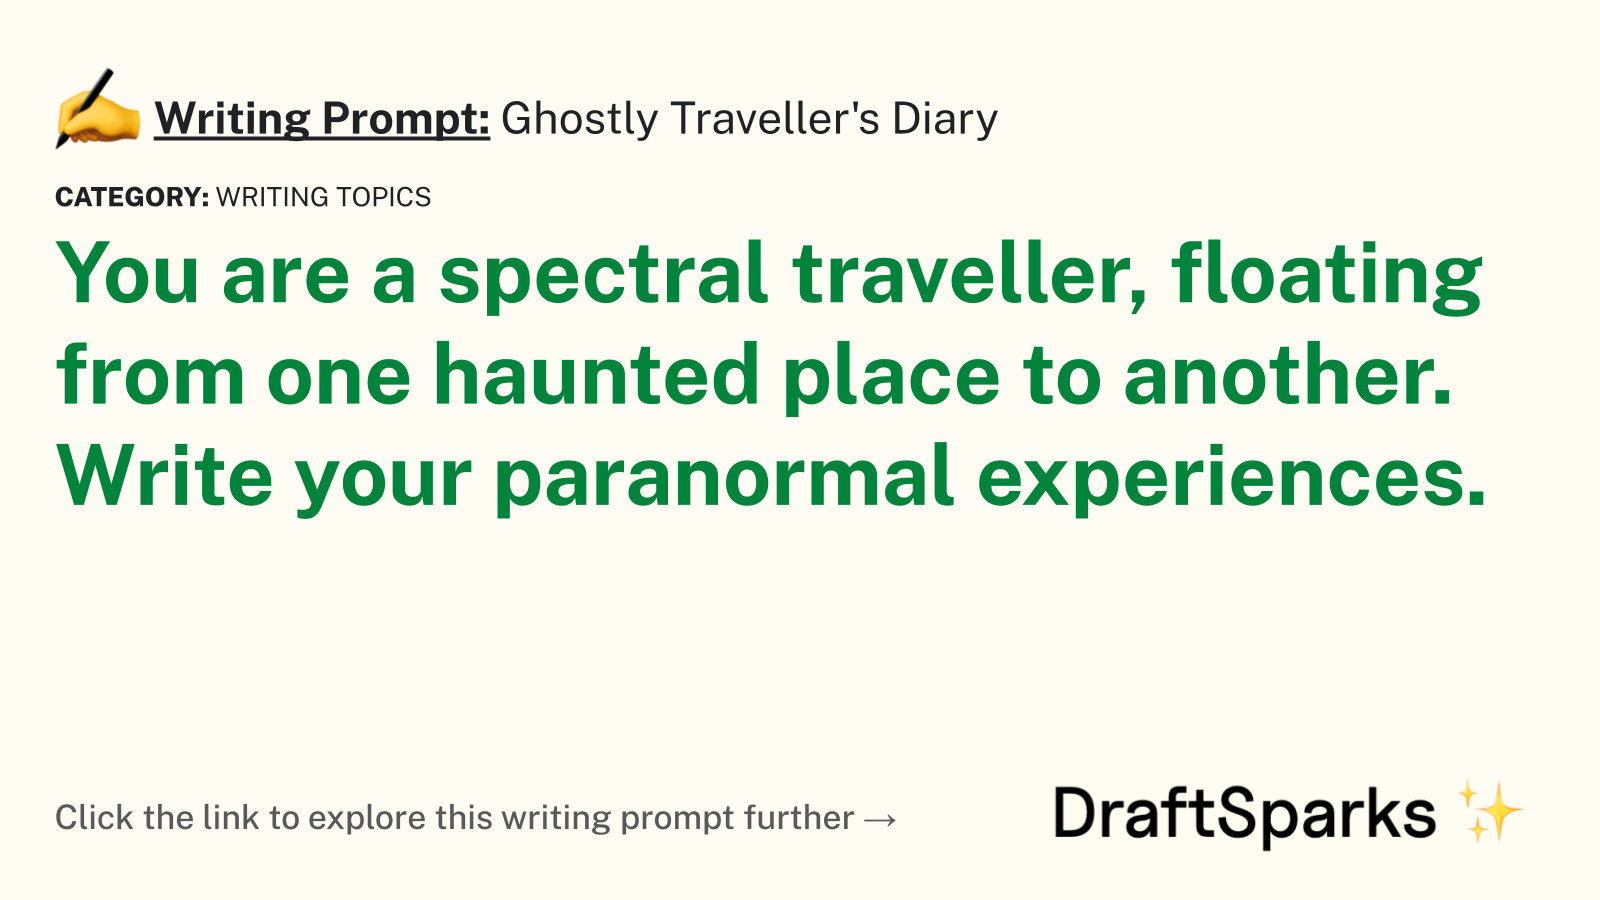 Ghostly Traveller’s Diary